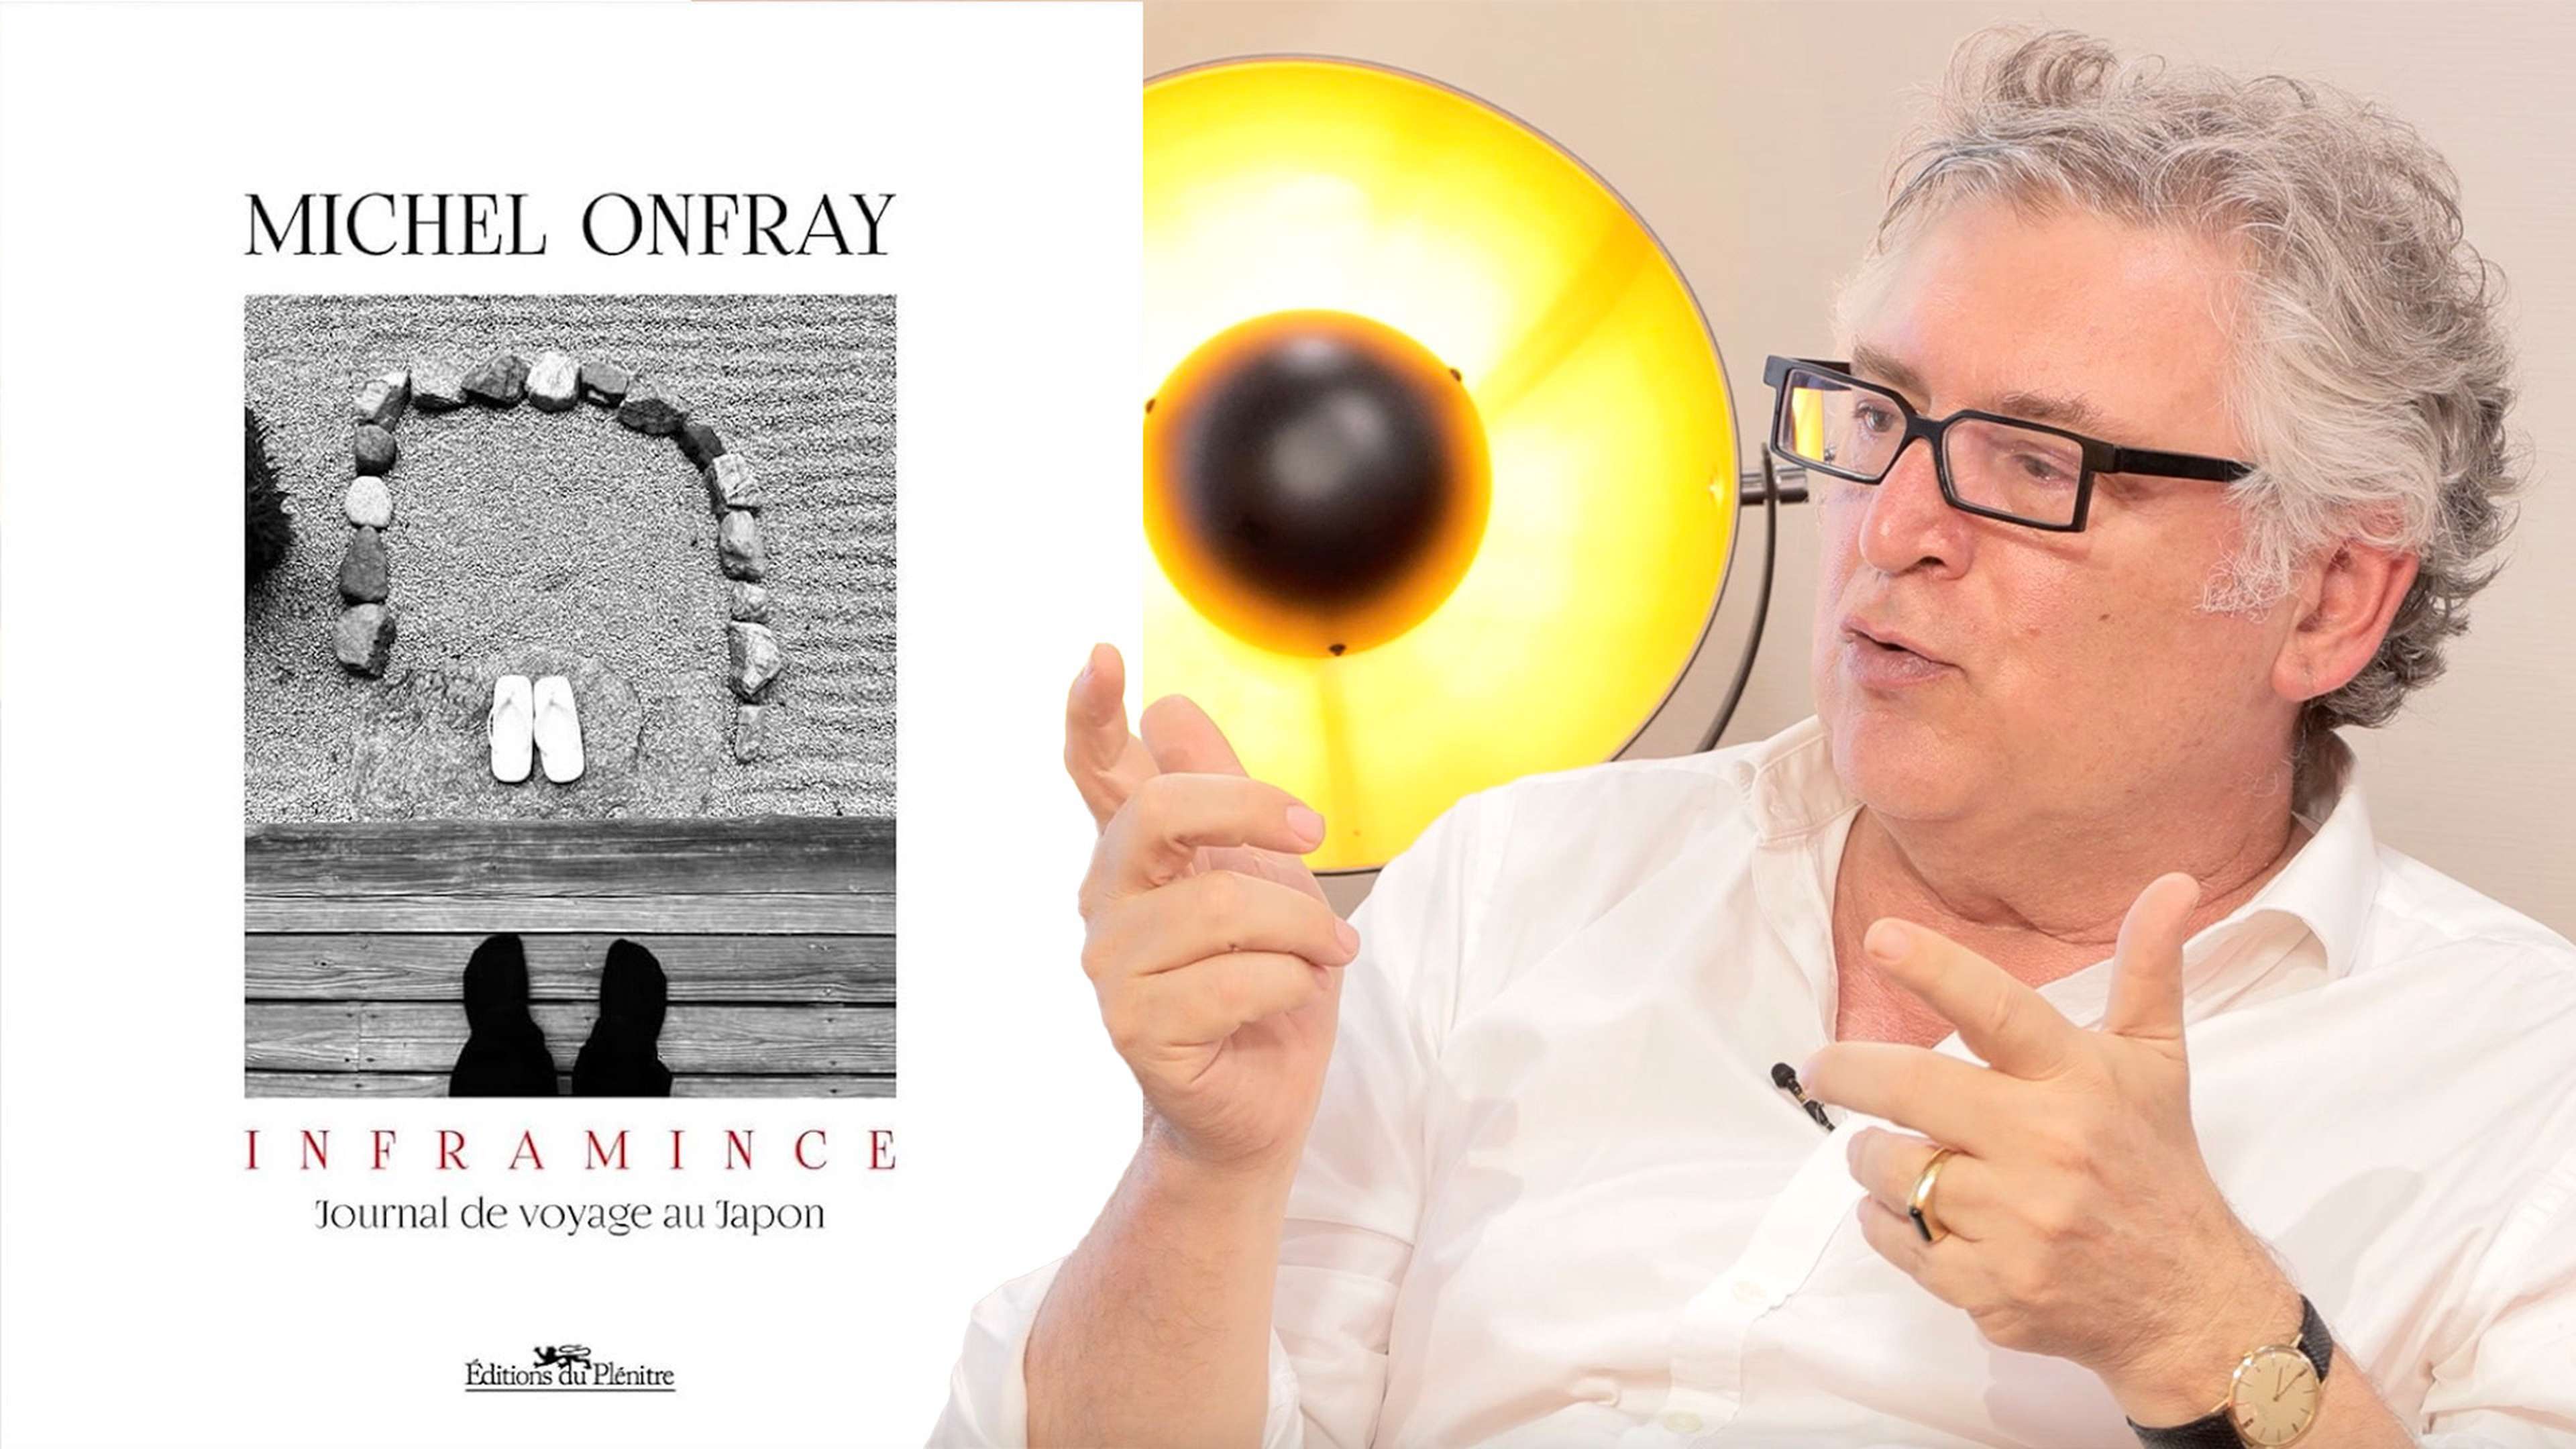 inframince-michel-onfray